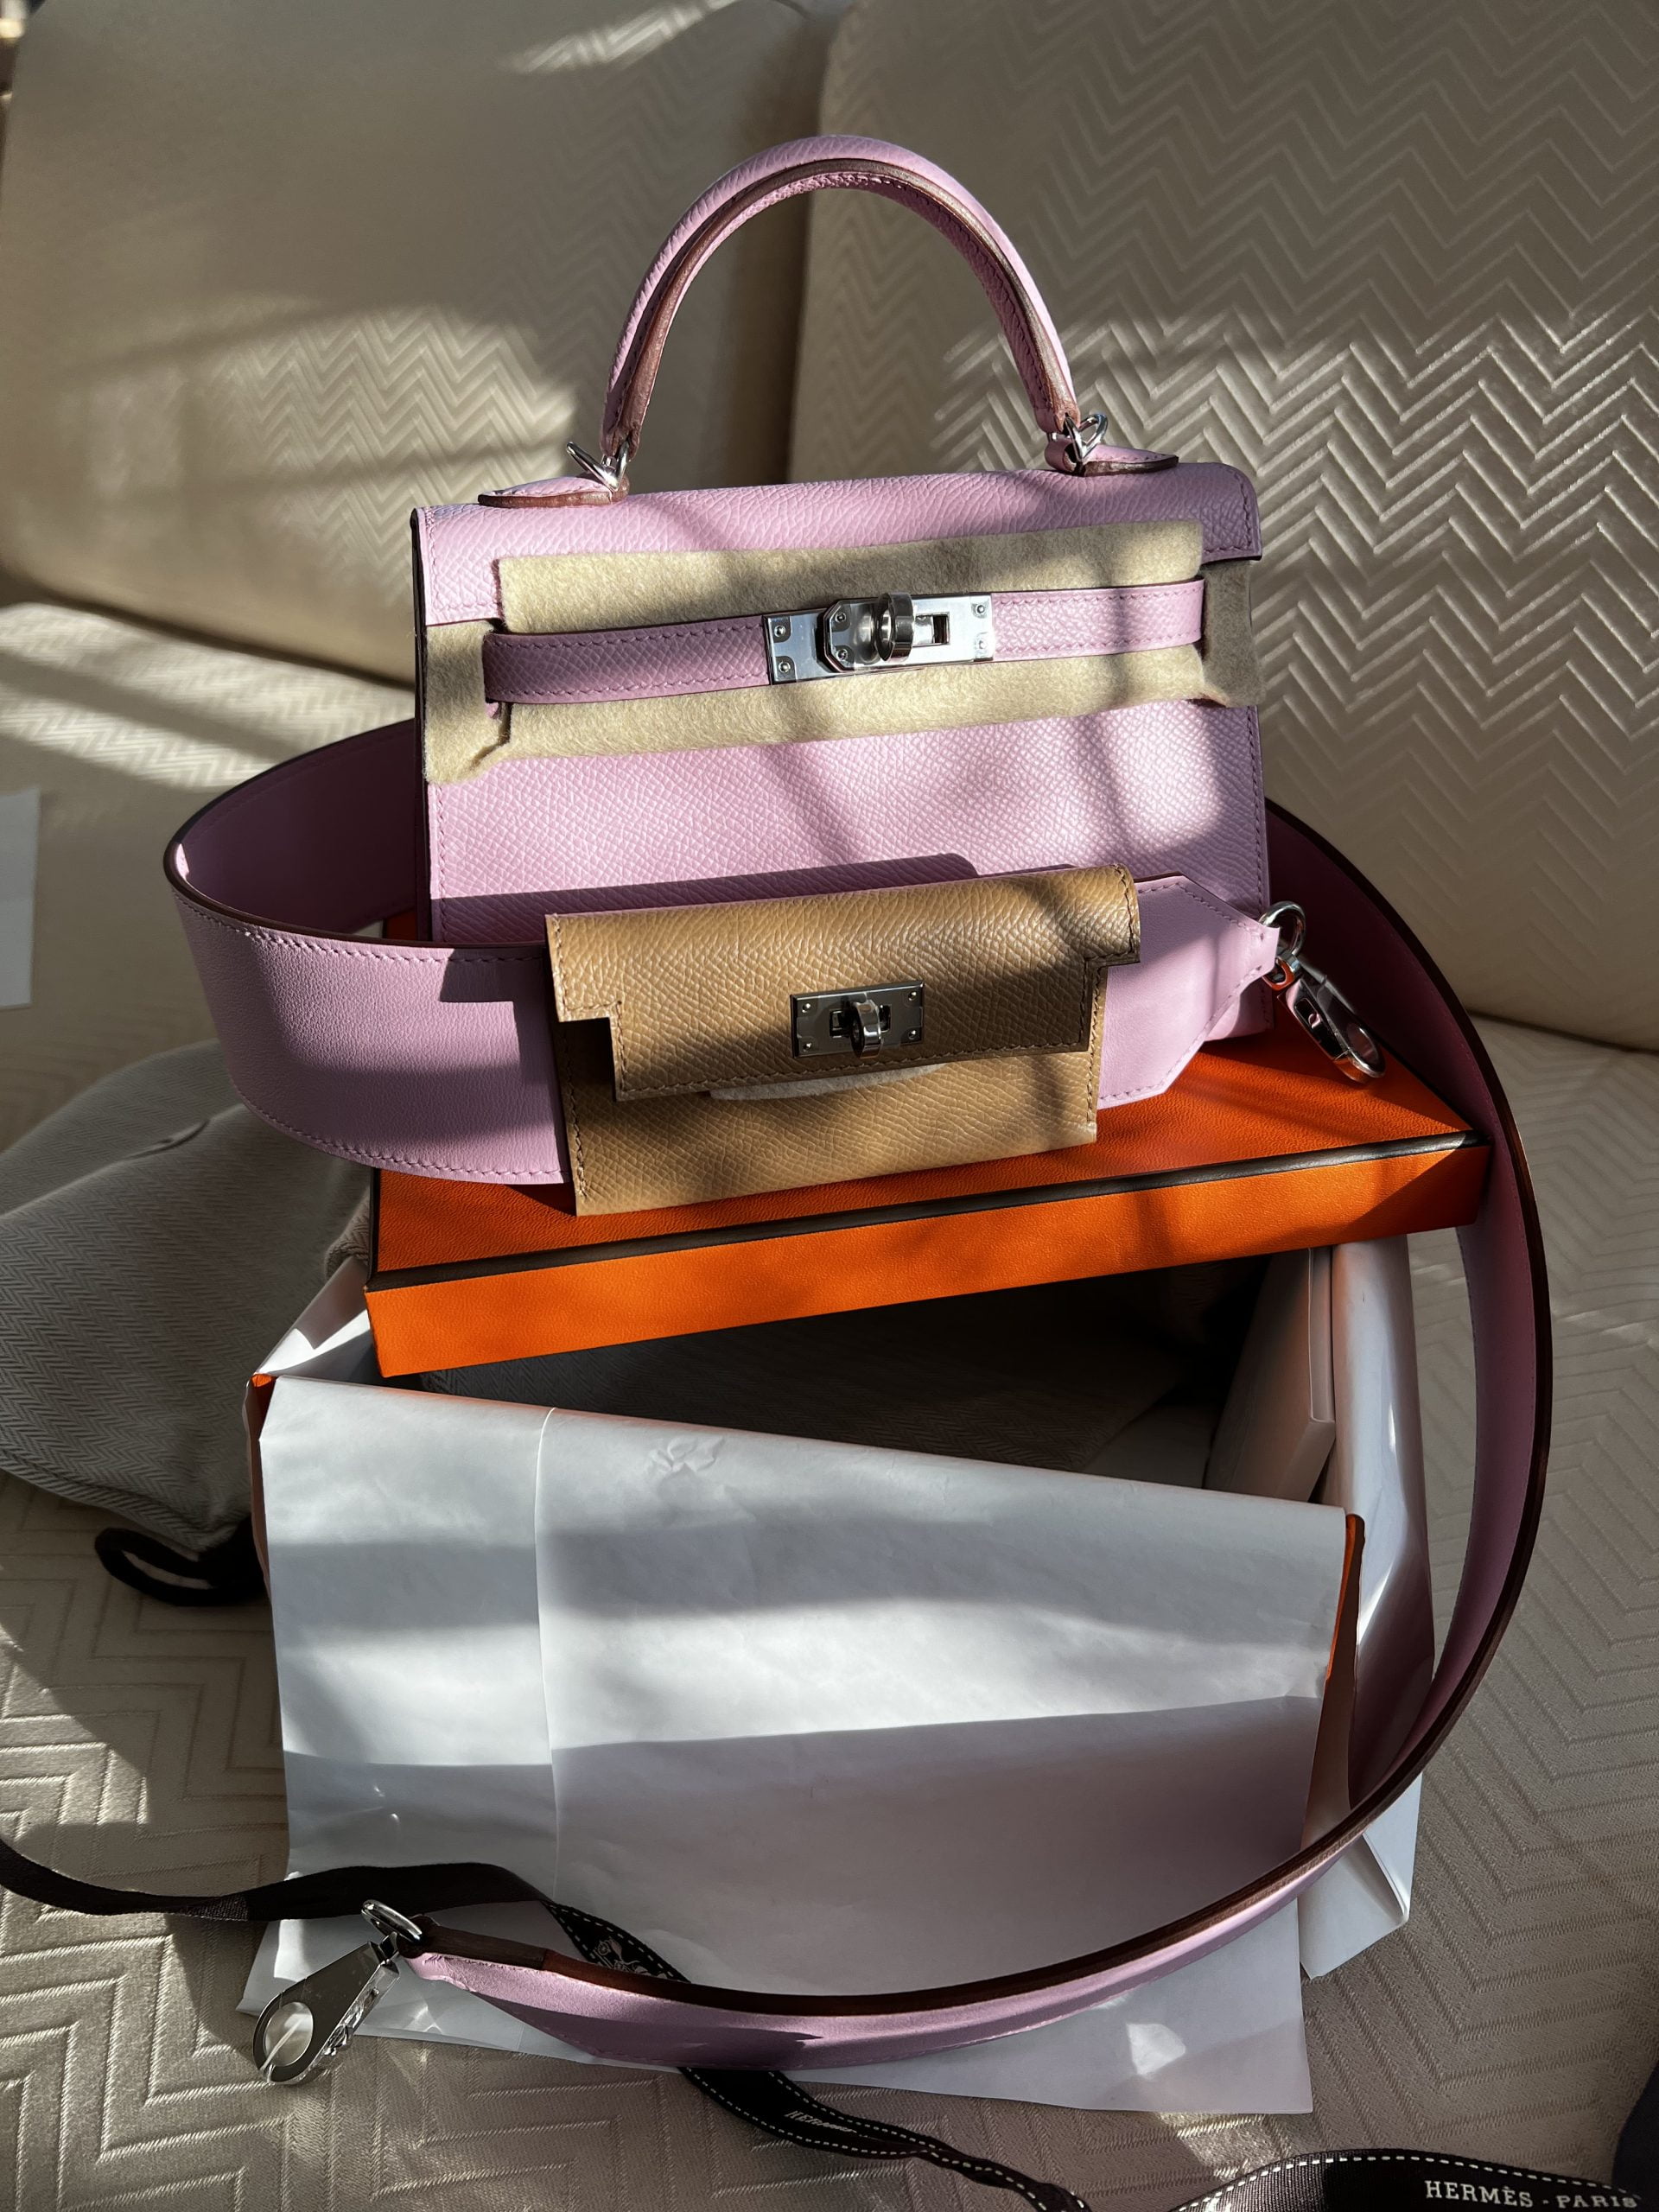 Hermes Launches The Ultimate 3 In 1 Handbag Boasting Compartments For Your  Phone, Airpods And Lipstick!